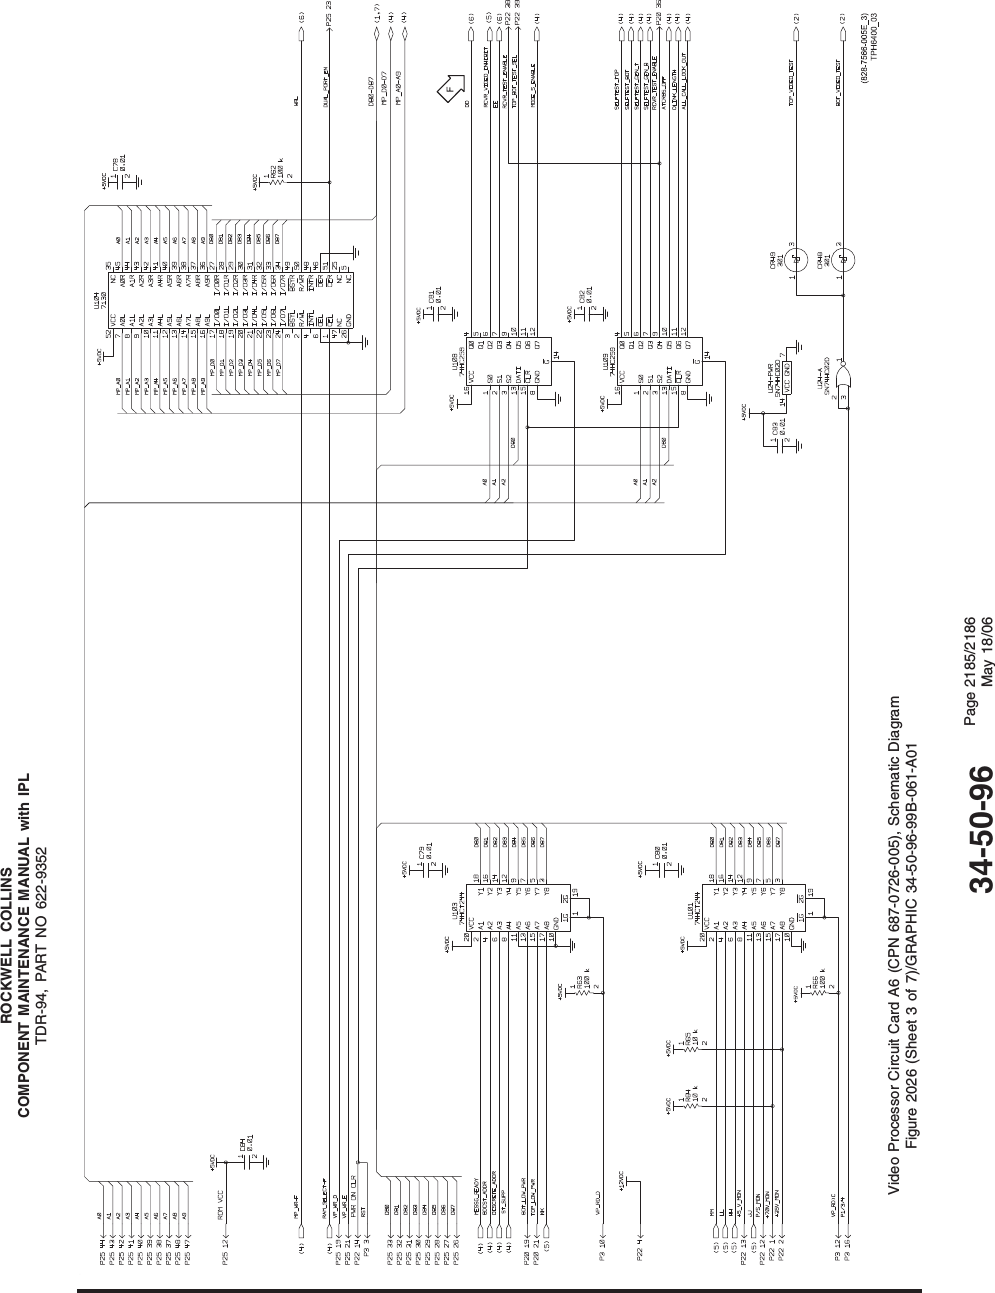 ROCKWELL COLLINSCOMPONENT MAINTENANCE MANUAL with IPLTDR-94, PART NO 622-9352Video Processor Circuit Card A6 (CPN 687-0726-005), Schematic DiagramFigure 2026 (Sheet 3 of 7)/GRAPHIC 34-50-96-99B-061-A0134-50-96 Page 2185/2186May 18/06